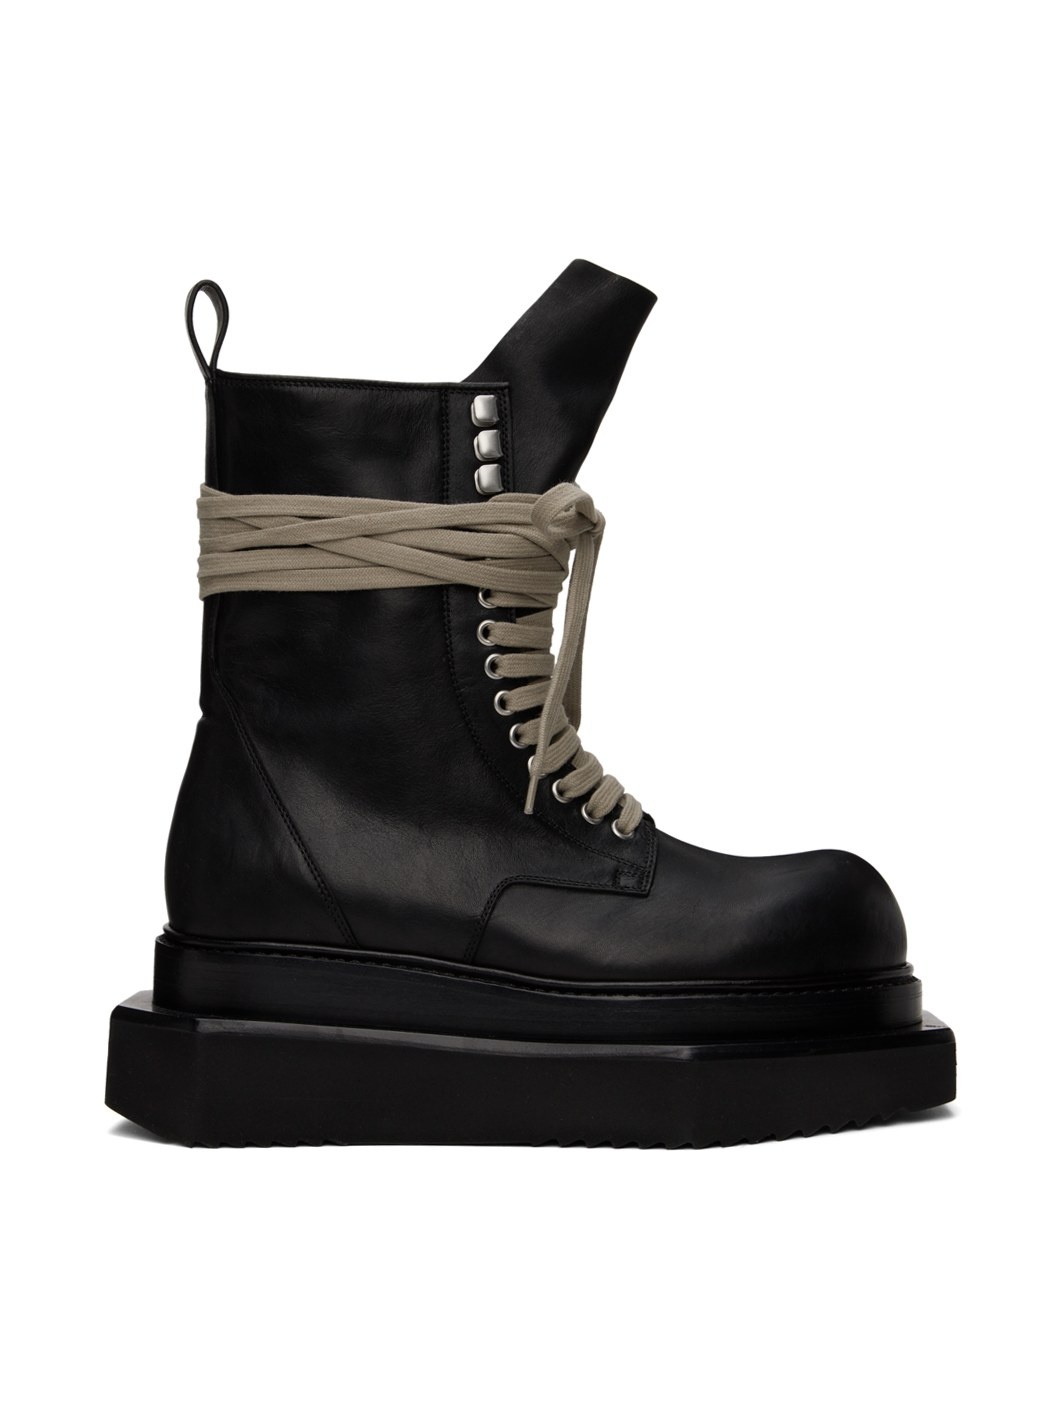 Black Laceup Turbo Cyclops Boots - 1